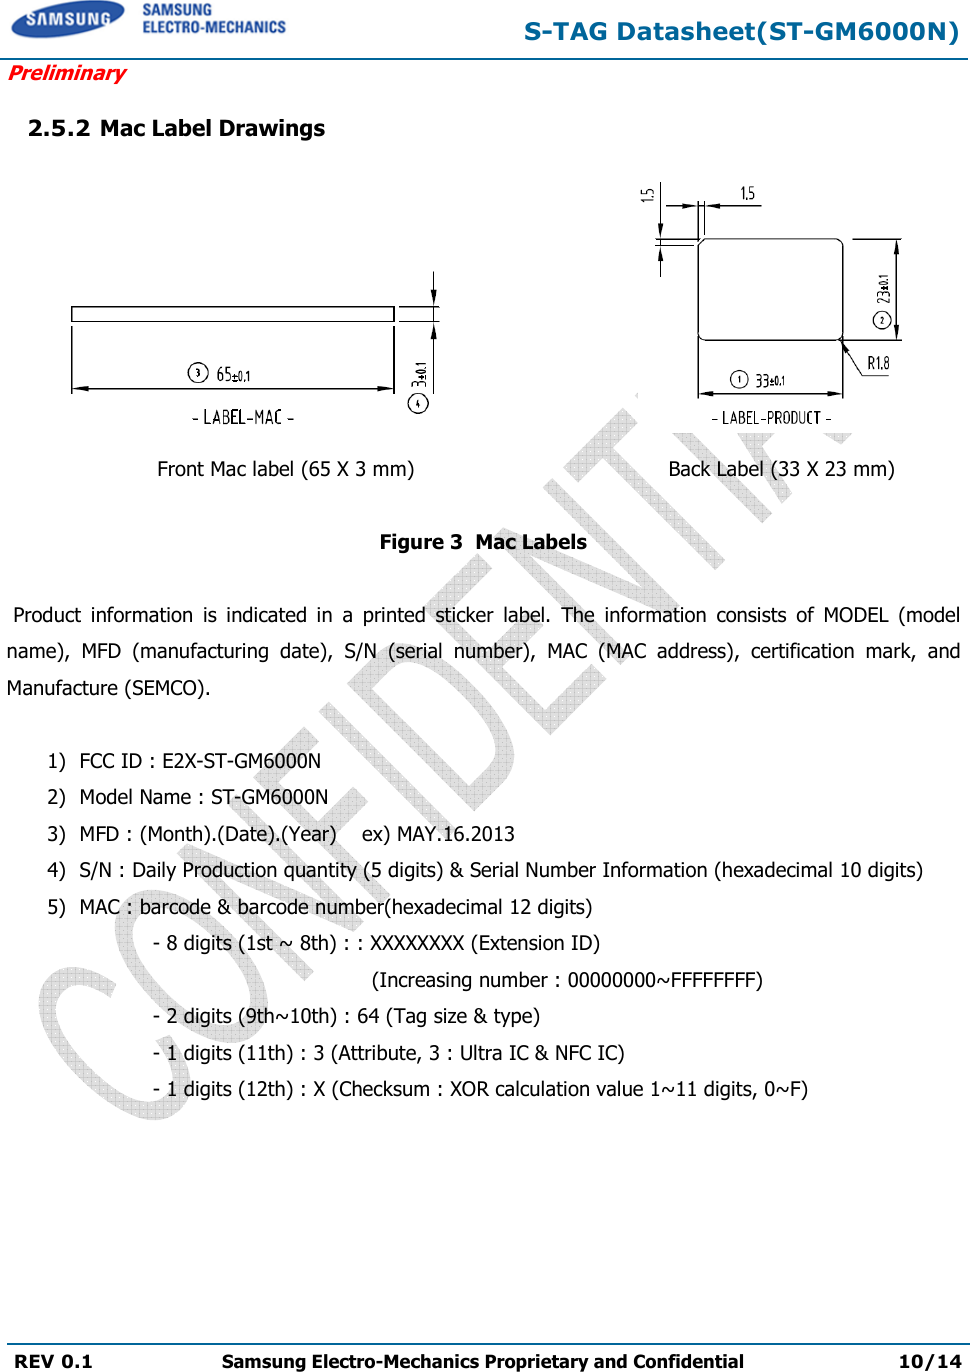 S-TAG Datasheet(ST-GM6000N) Preliminary REV 0.1  Samsung Electro-Mechanics Proprietary and Confidential 10/14 2.5.2 Mac Label Drawings Front Mac label (65 X 3 mm)  Back Label (33 X 23 mm) Figure 3  Mac Labels Product  information  is  indicated  in  a  printed  sticker  label.  The  information  consists  of  MODEL  (model name),  MFD  (manufacturing  date),  S/N  (serial  number),  MAC  (MAC  address),  certification  mark,  and Manufacture (SEMCO). 1) FCC ID : E2X-ST-GM6000N2) Model Name : ST-GM6000N3) MFD : (Month).(Date).(Year)    ex) MAY.16.20134) S/N : Daily Production quantity (5 digits) &amp; Serial Number Information (hexadecimal 10 digits)5) MAC : barcode &amp; barcode number(hexadecimal 12 digits)- 8 digits (1st ~ 8th) : : XXXXXXXX (Extension ID) (Increasing number : 00000000~FFFFFFFF) - 2 digits (9th~10th) : 64 (Tag size &amp; type) - 1 digits (11th) : 3 (Attribute, 3 : Ultra IC &amp; NFC IC) - 1 digits (12th) : X (Checksum : XOR calculation value 1~11 digits, 0~F) 